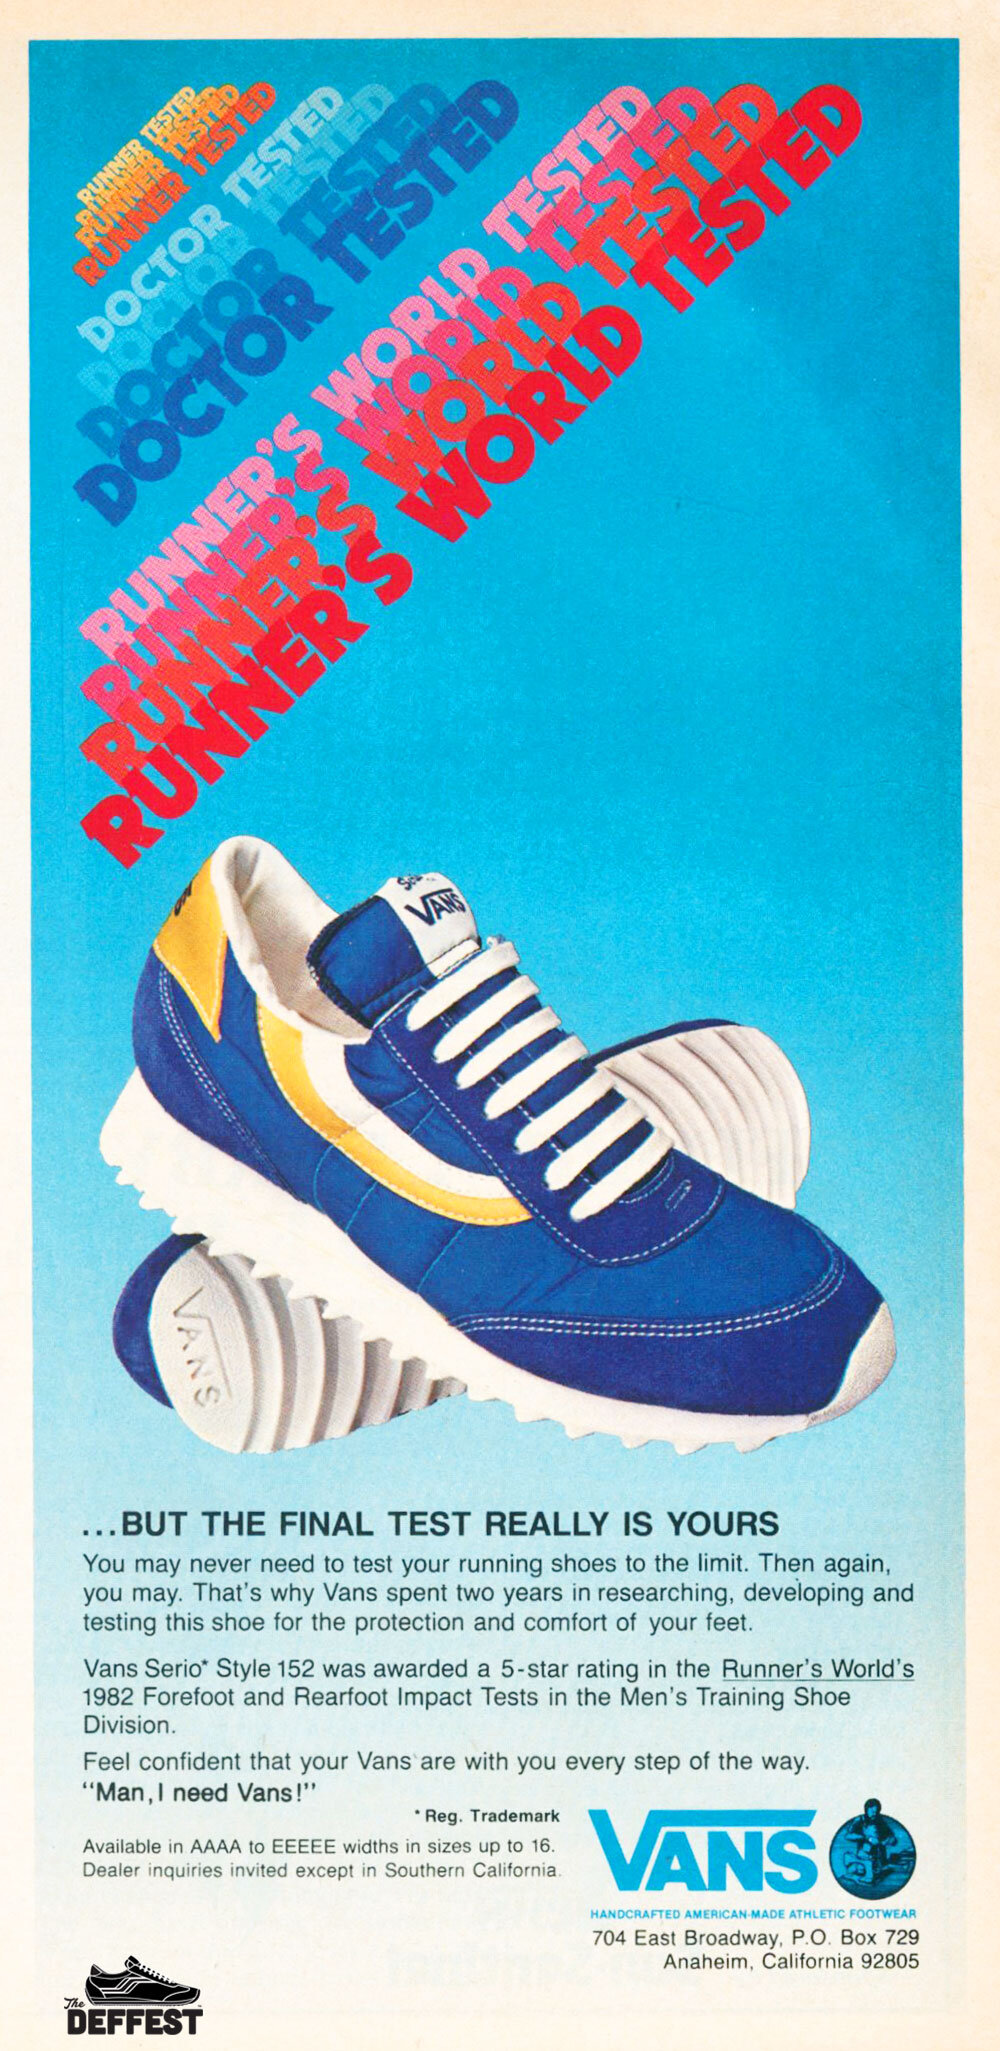 The Deffest®. A and retro sneaker blog. Vans vintage 1982 running shoe